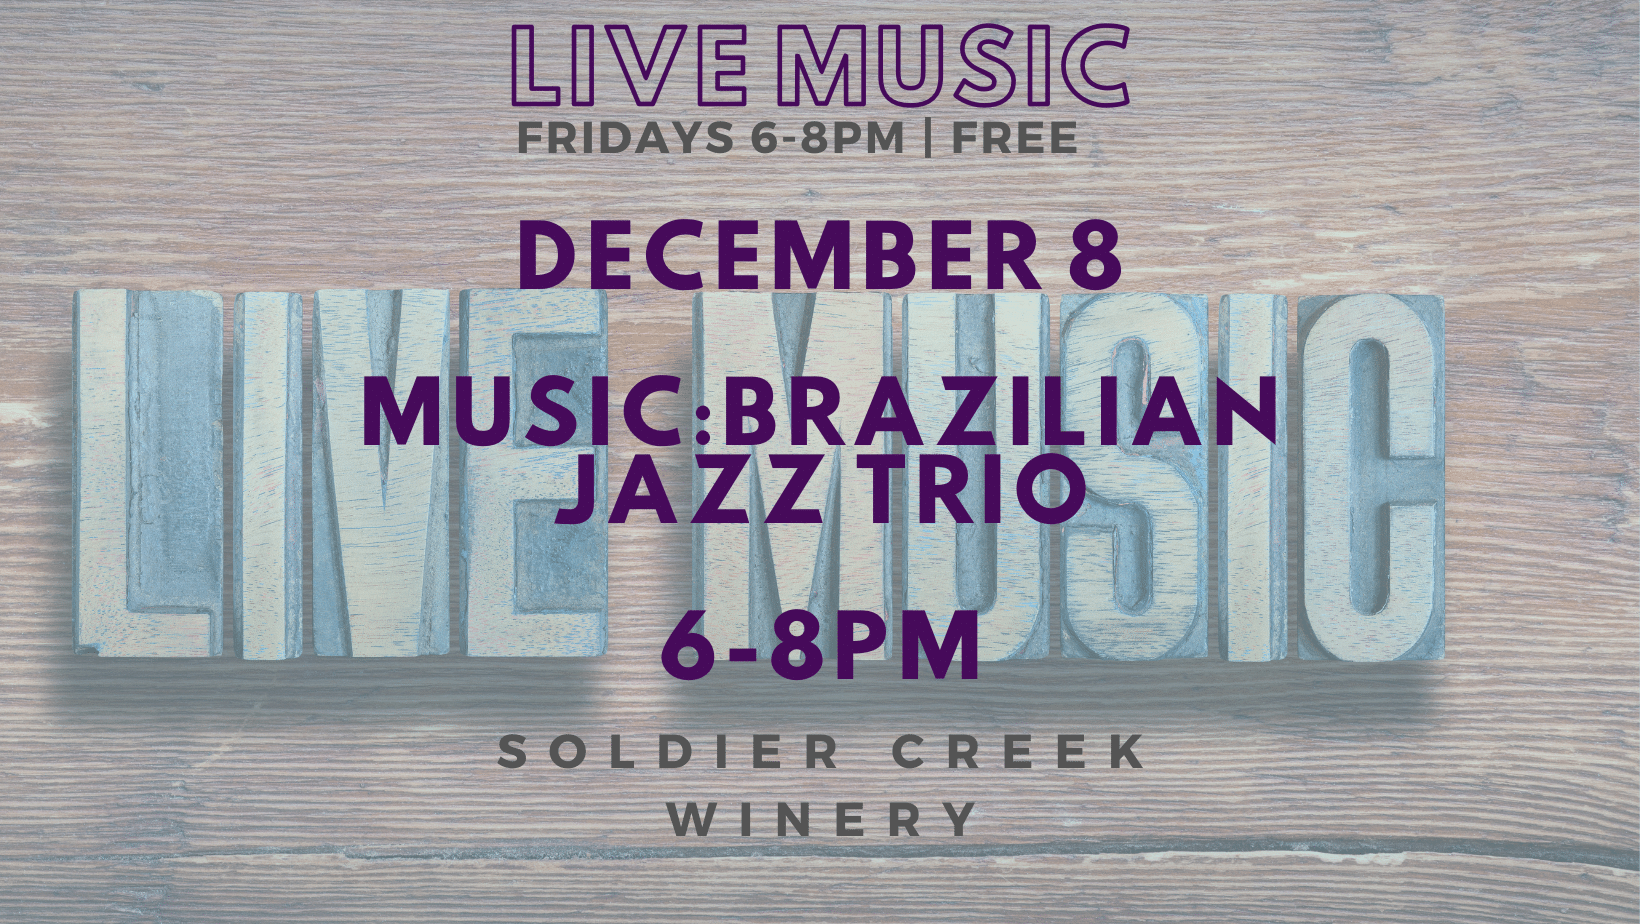 vineyard vibrations at soldier creek winery on friday, dec 8 from 6-8pm featuring the brazilian jazz trio. free to listen!